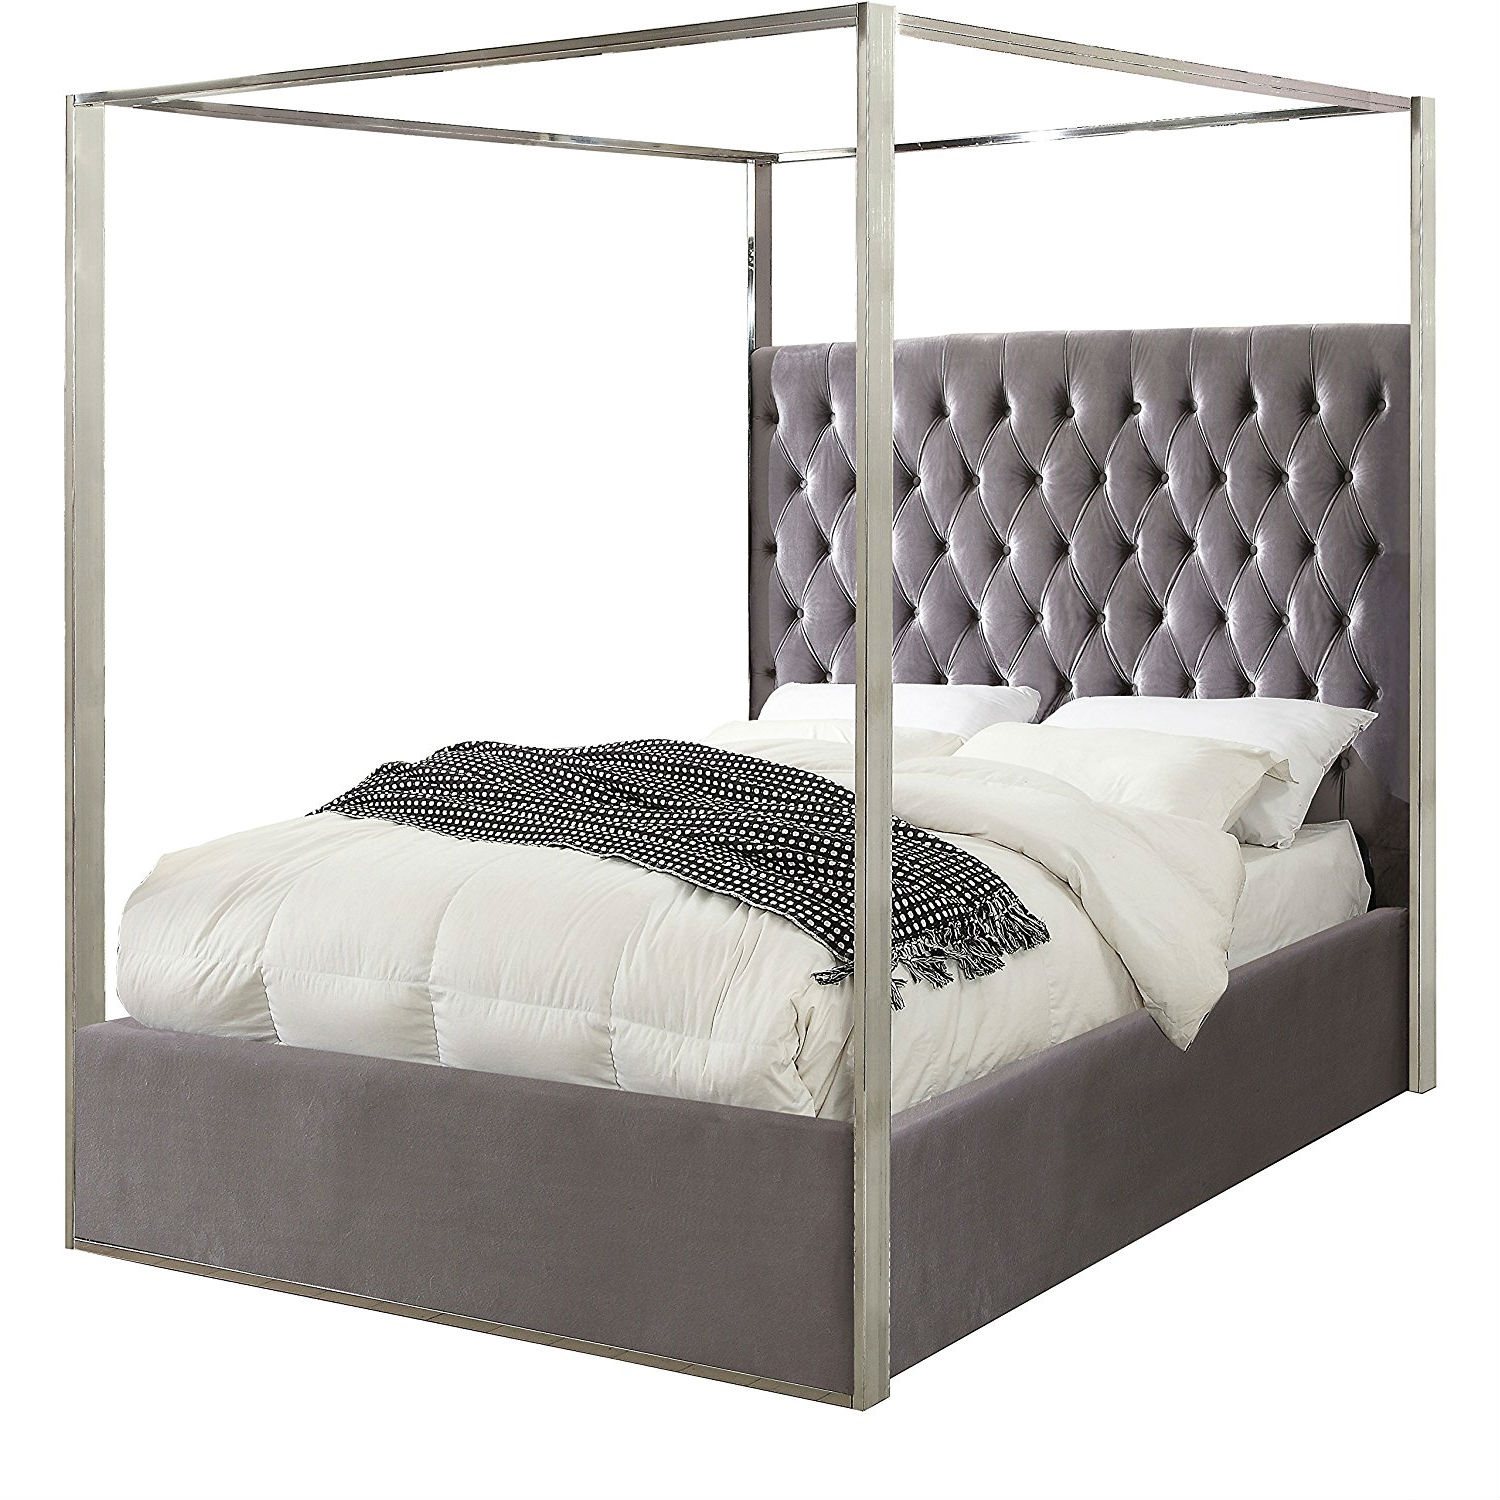 King size Grey Velvet Upholstered Canopy Bed with Chrome Canopy